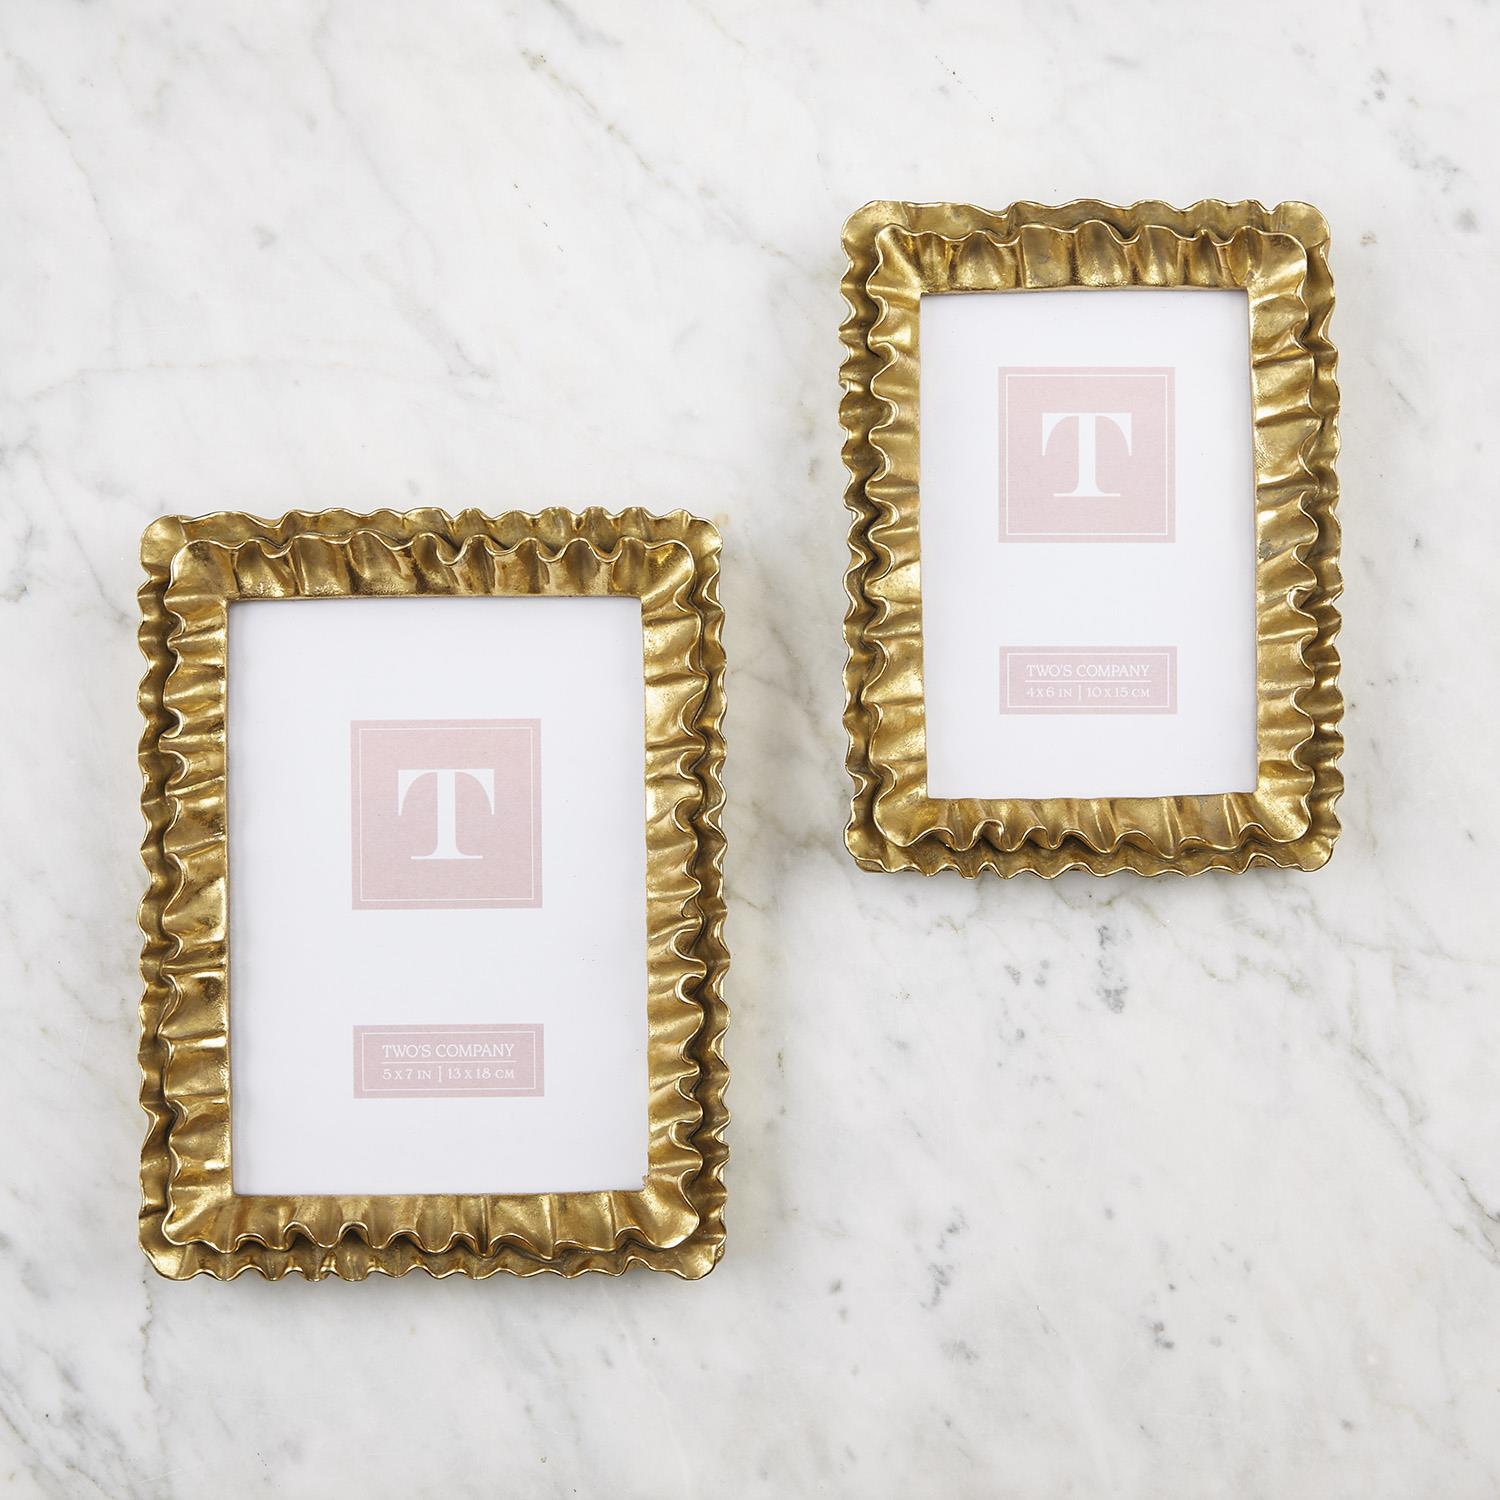 Two's Company S/2 Gold Ruffles Photo Frames Incl 2 Sizes